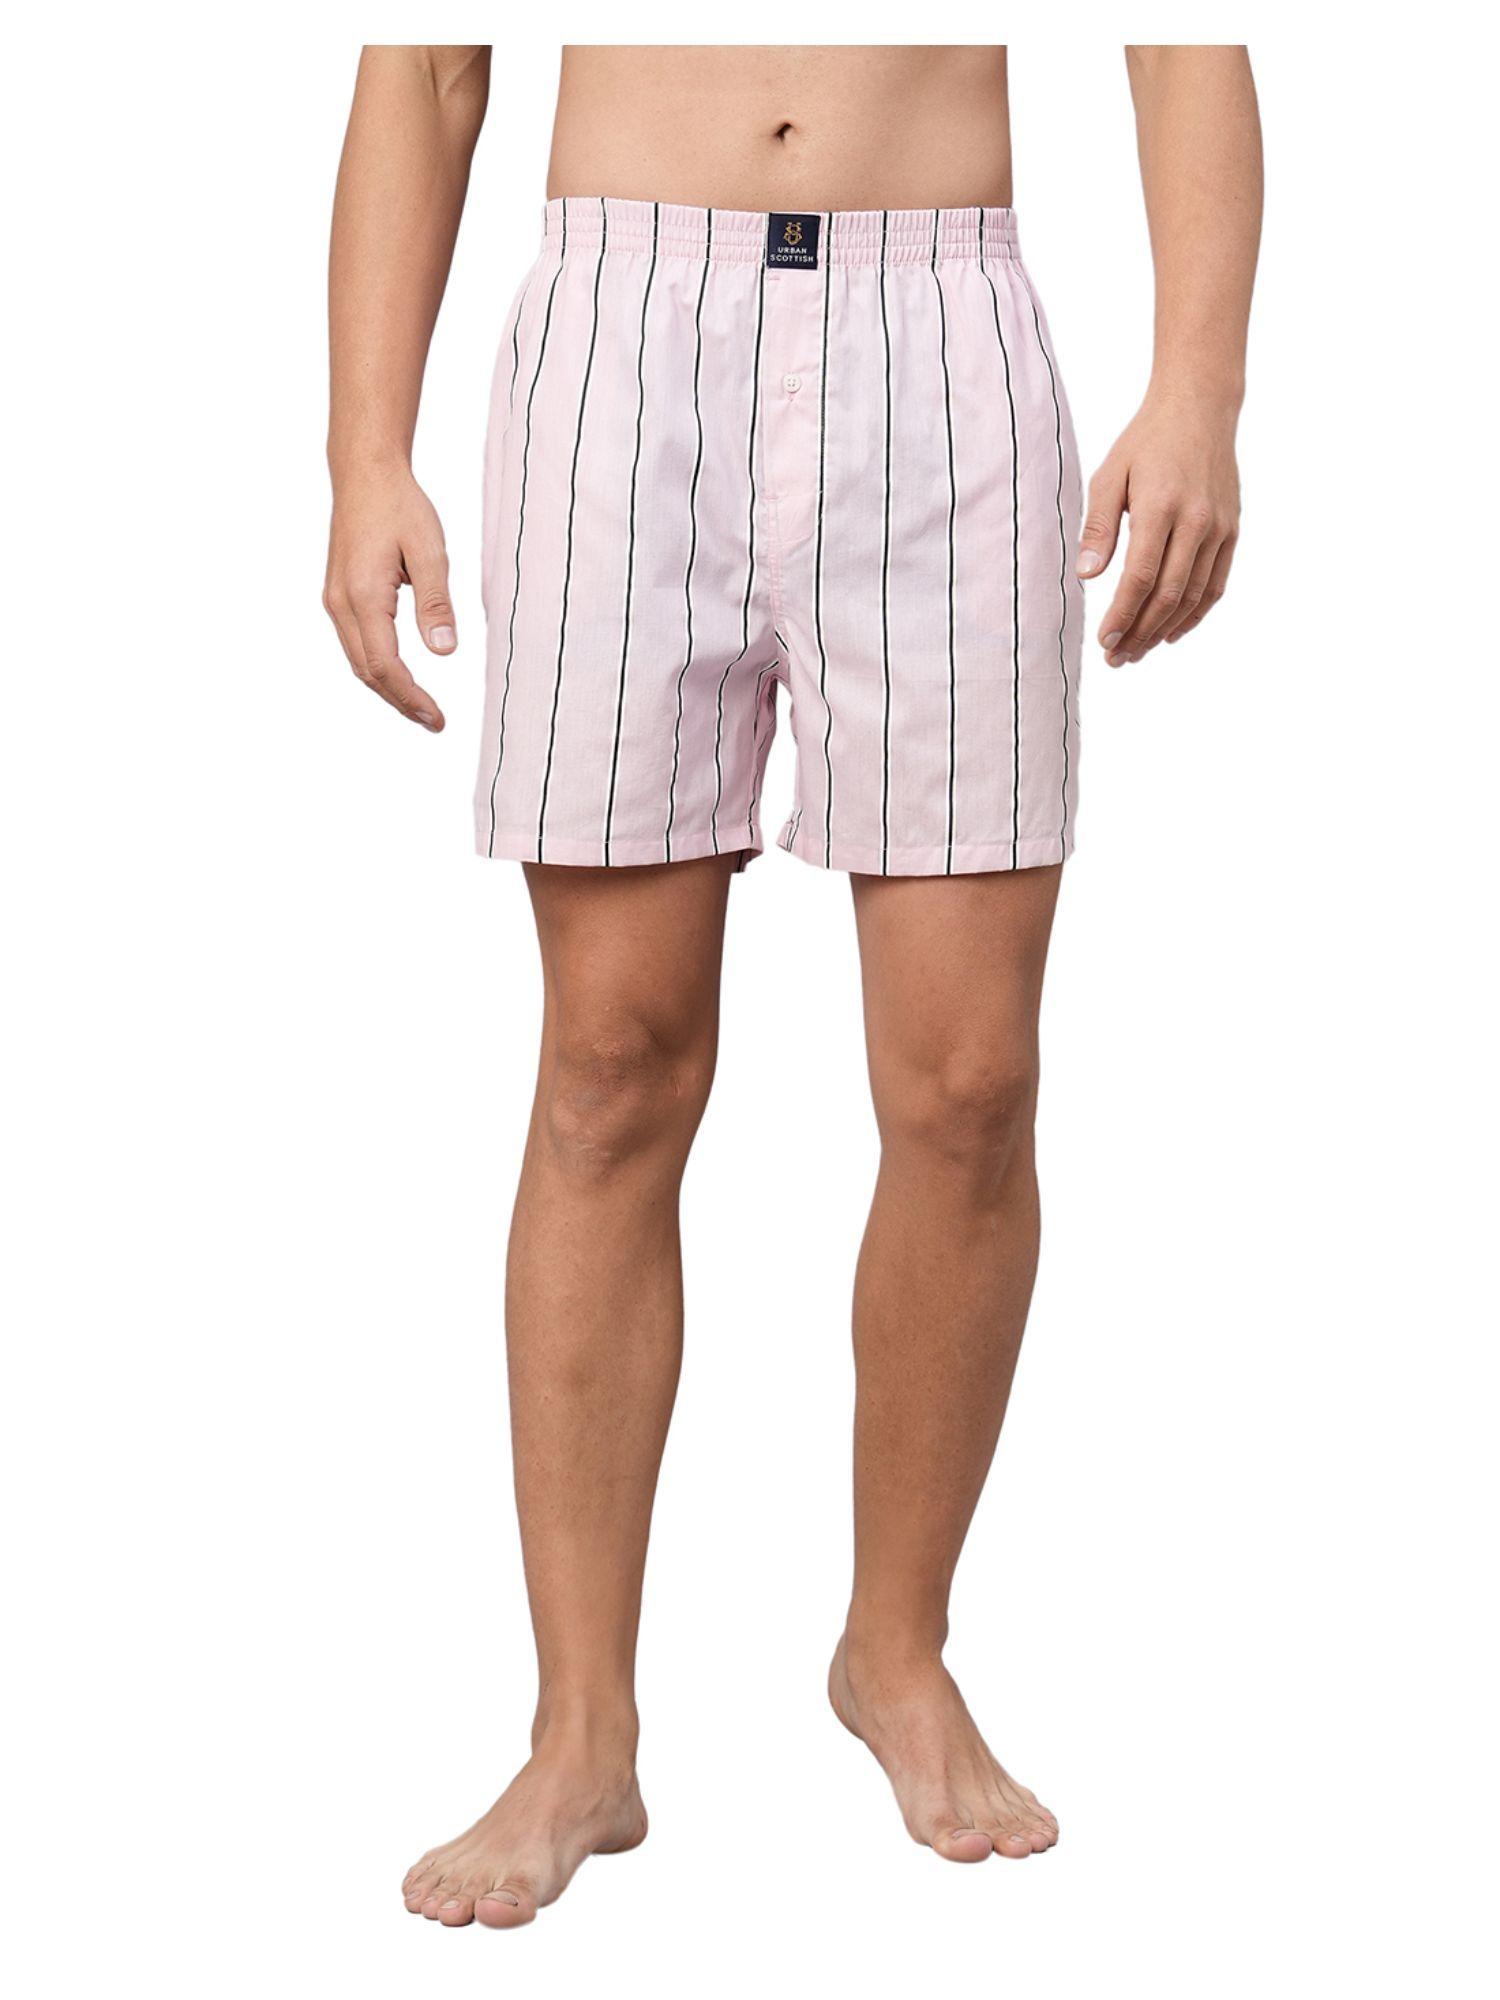 men relaxed pink striped boxer shorts